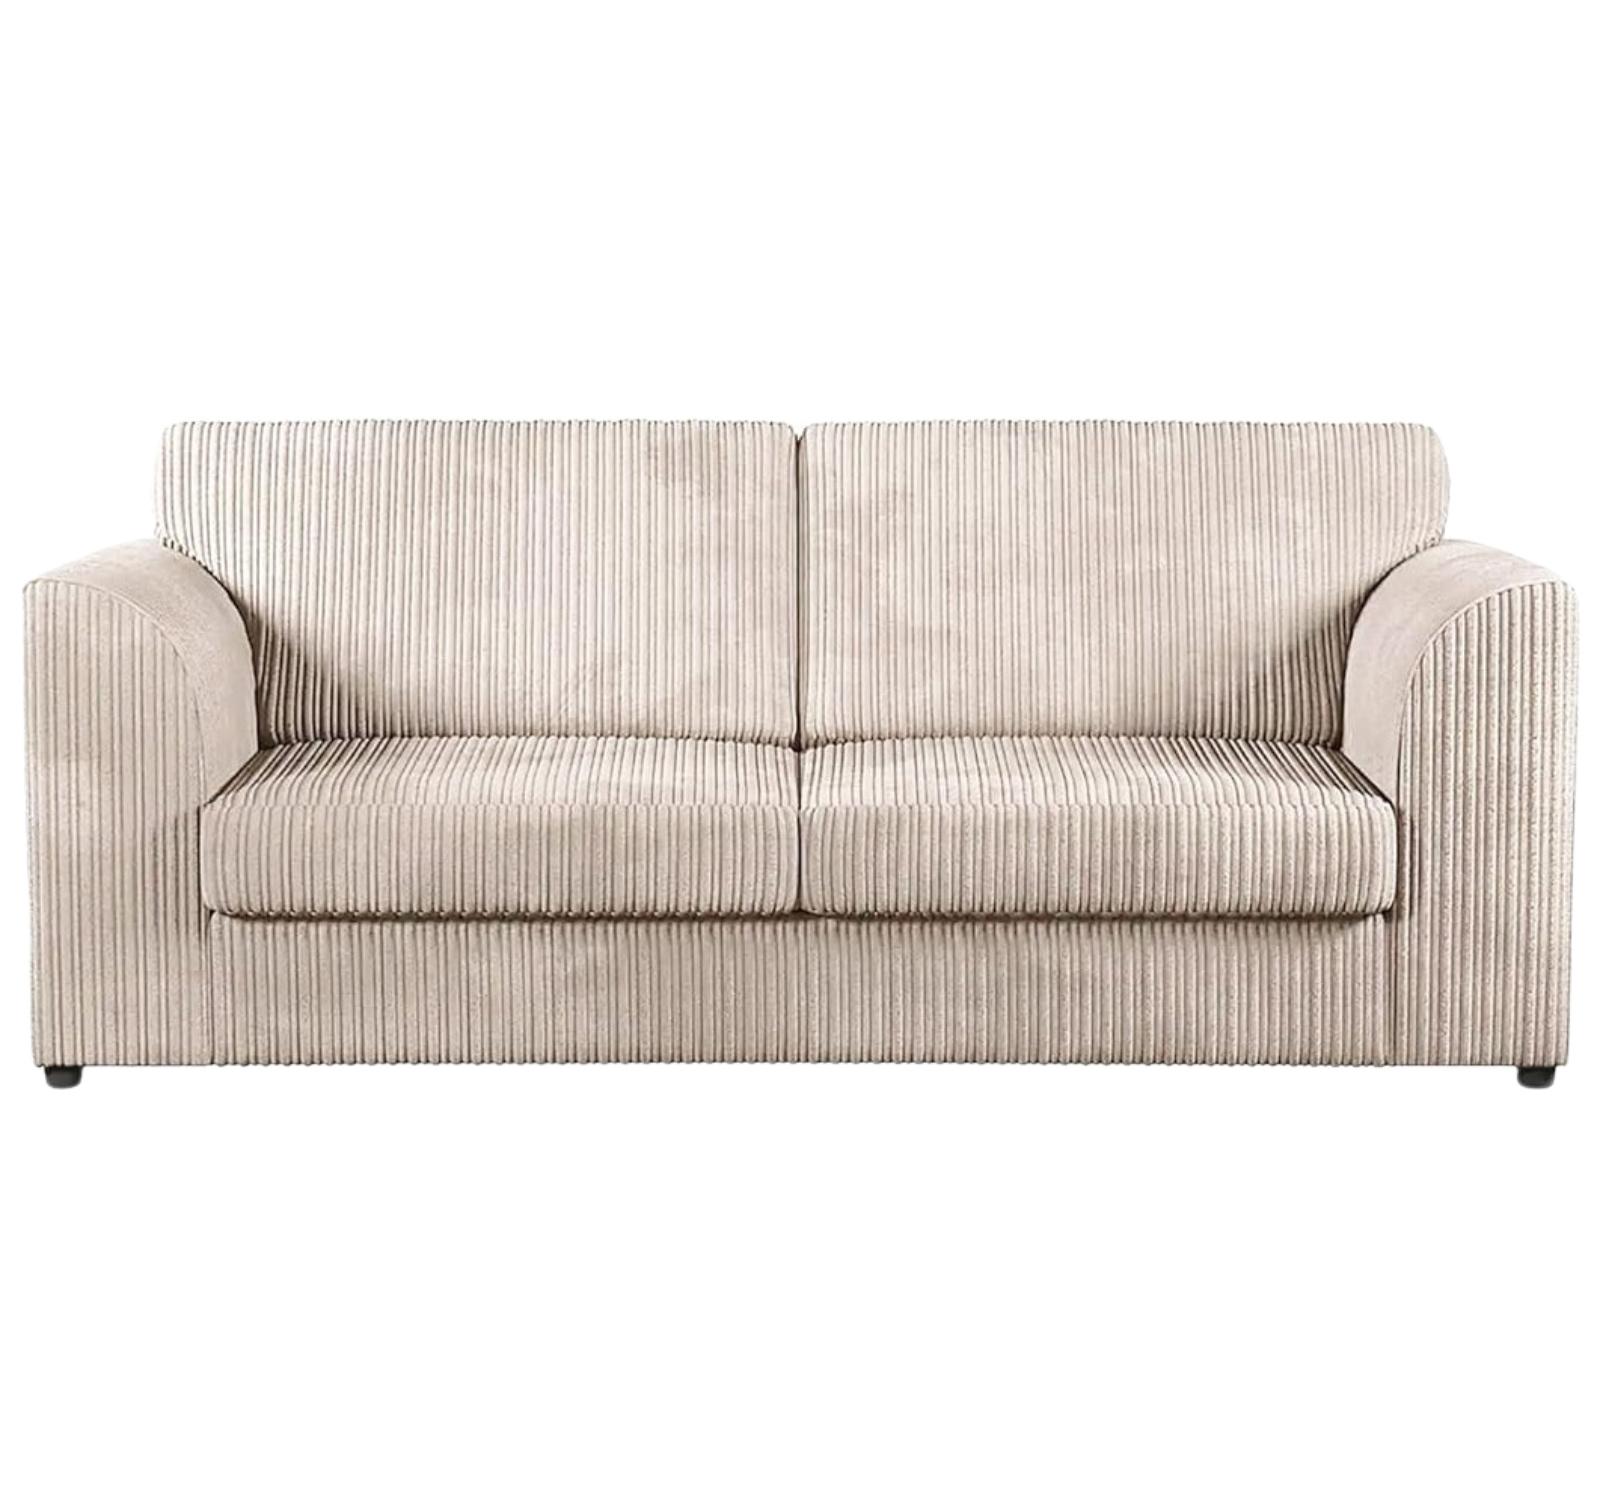 Jumbo Cord 3 Seater Sofa, The Perfect Combination Of Comfort (High Back)